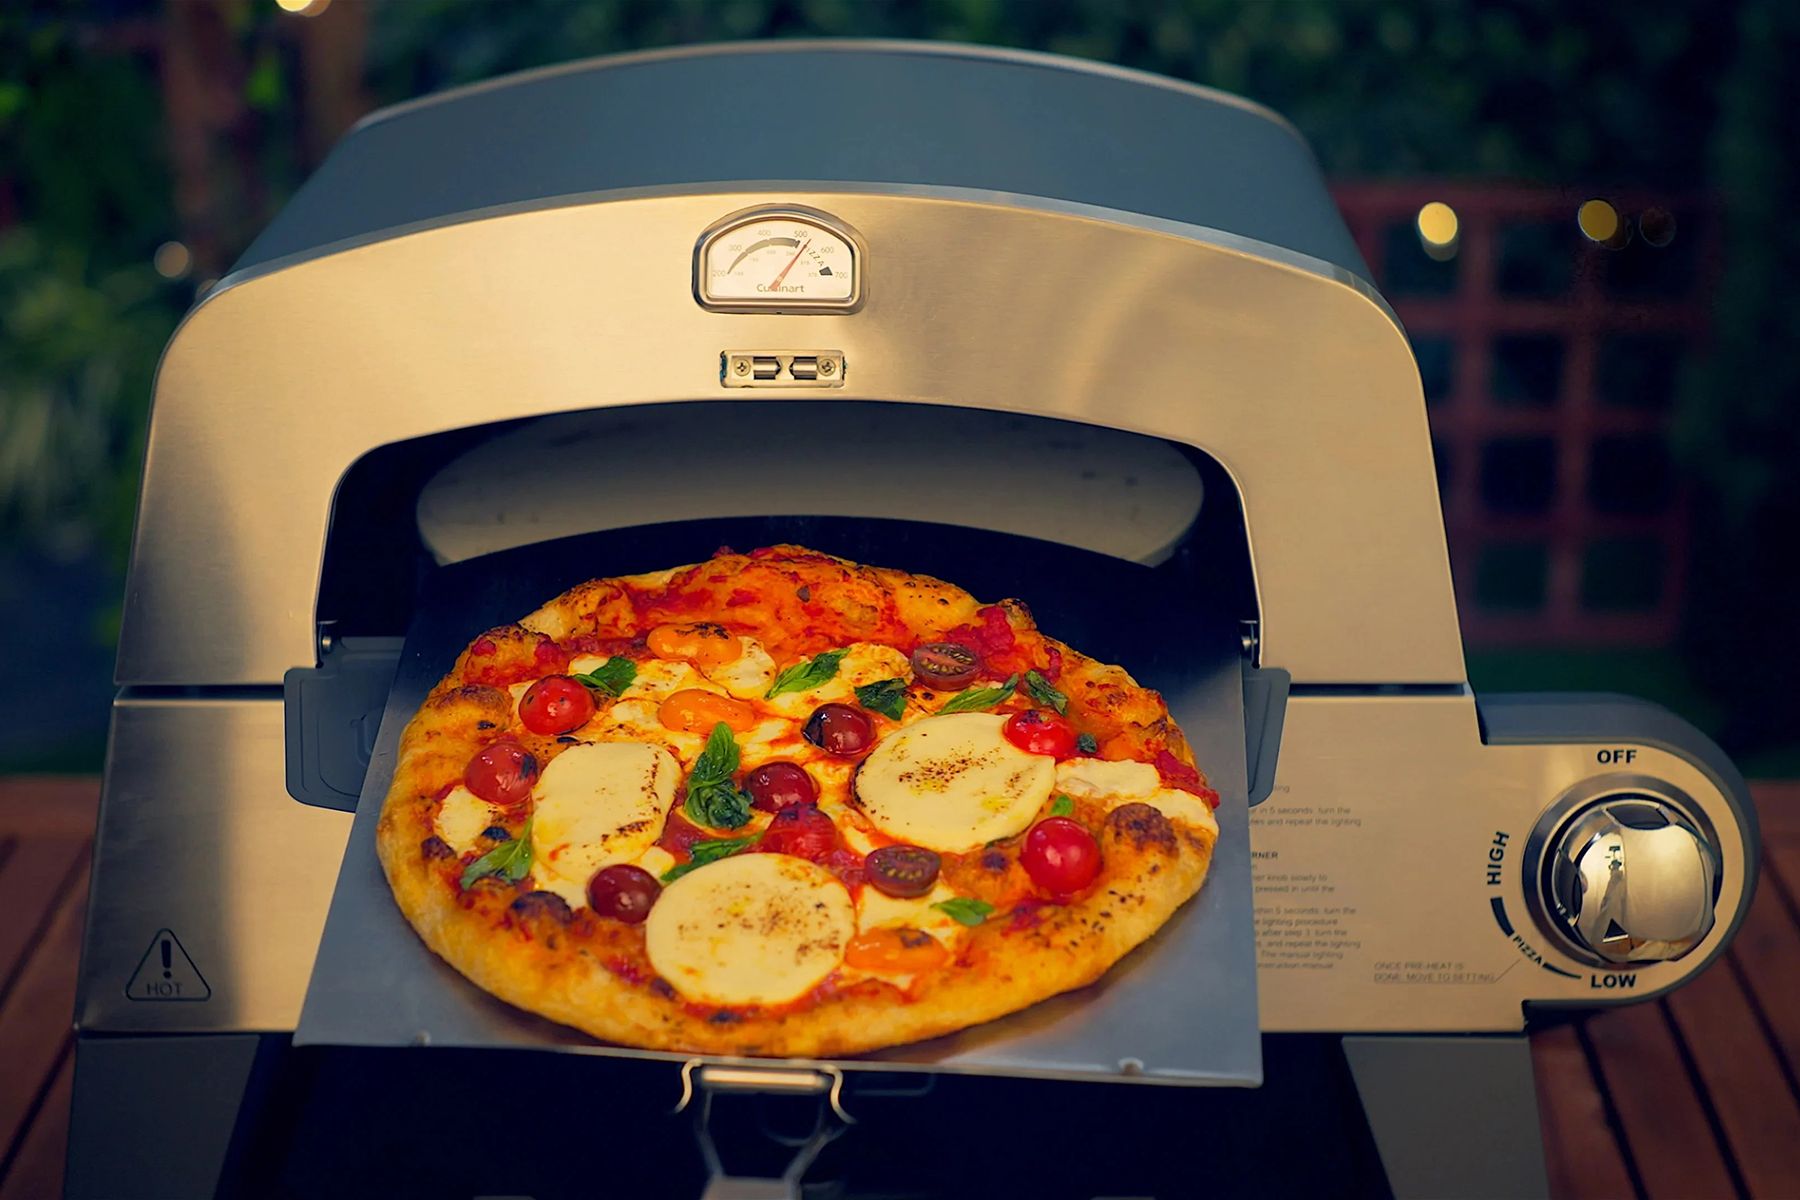 Reviews for NINJA Woodfire Pizza Oven, 8-in-1 Outdoor Oven, 5